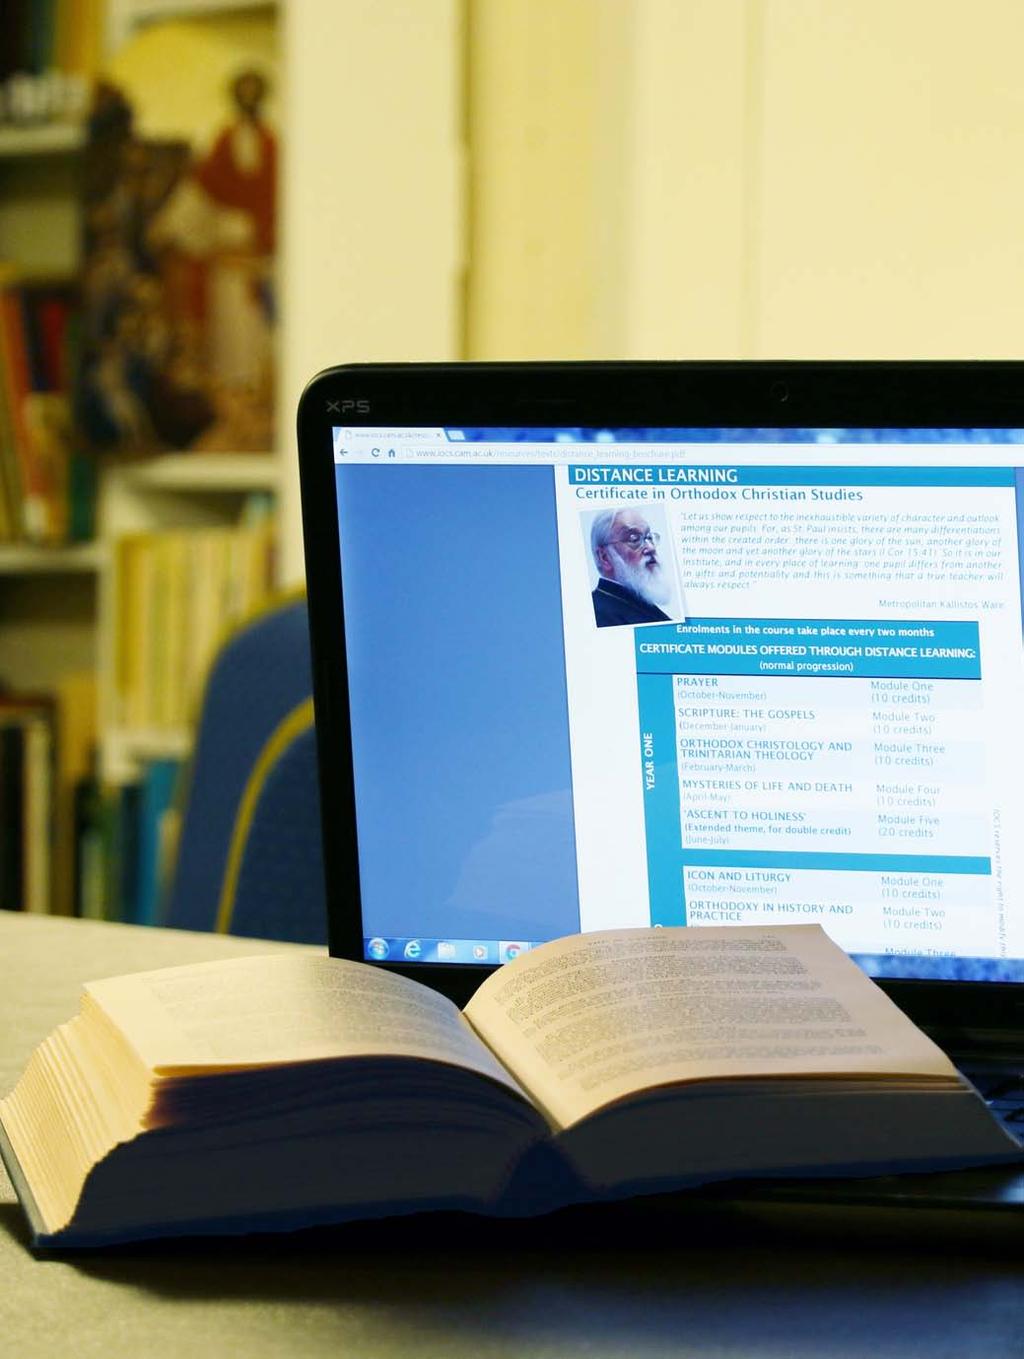 DISTANCE LEARNING CERTIFICATE IN ORTHODOX CHRISTIAN STUDIES